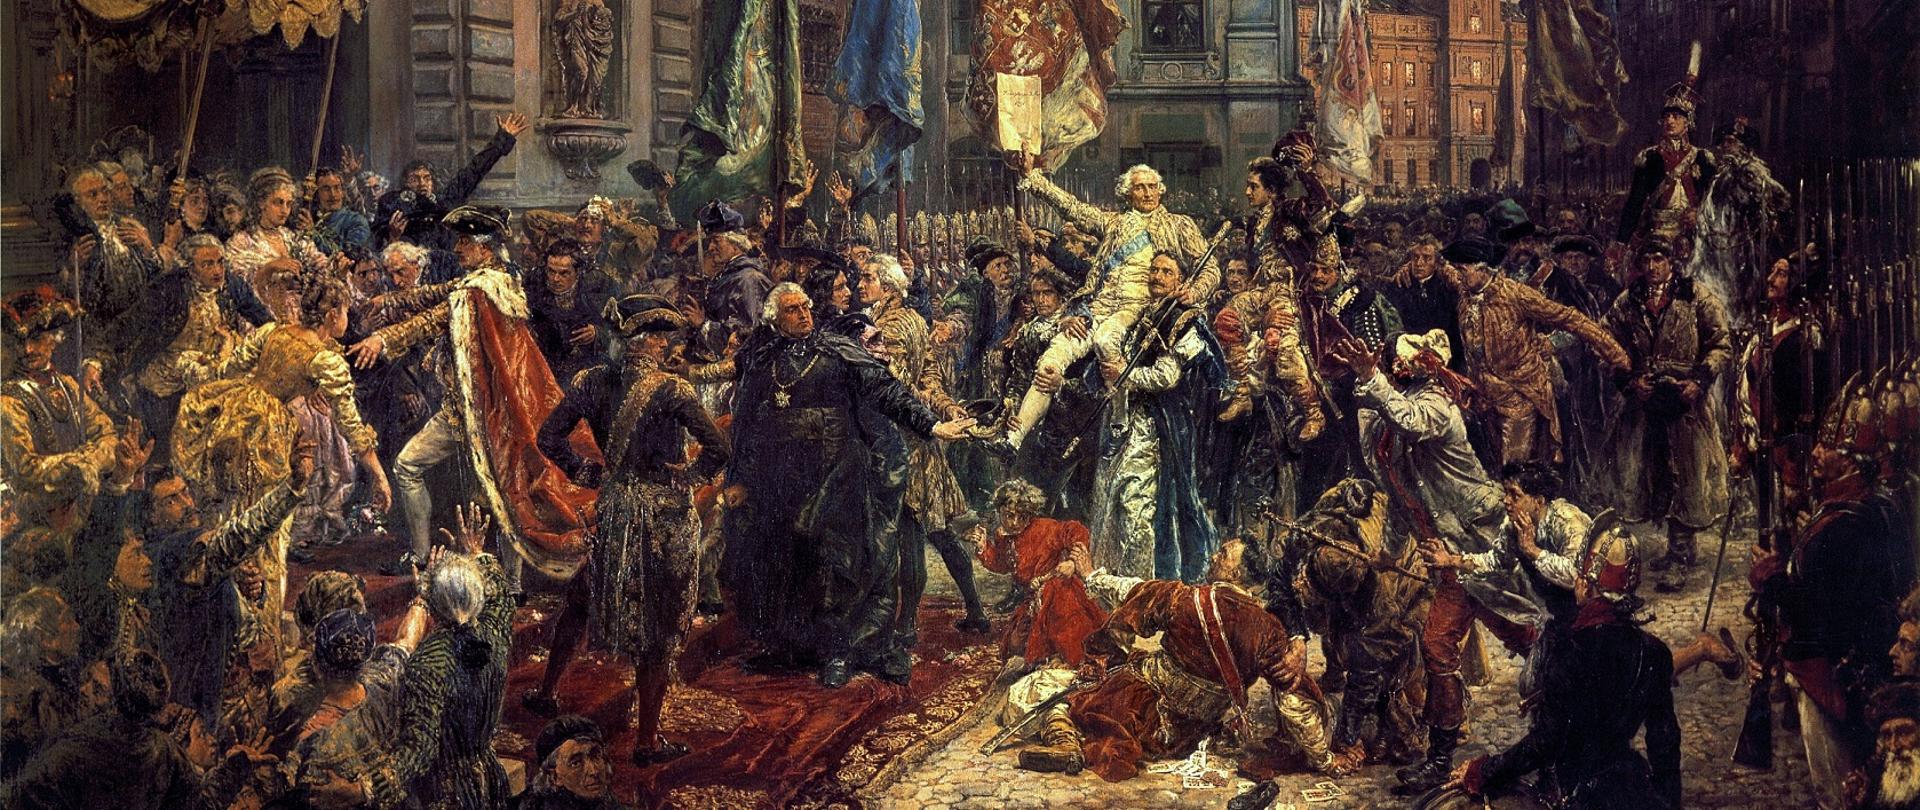 Constitution of 3 May – painting by Jan Matejko